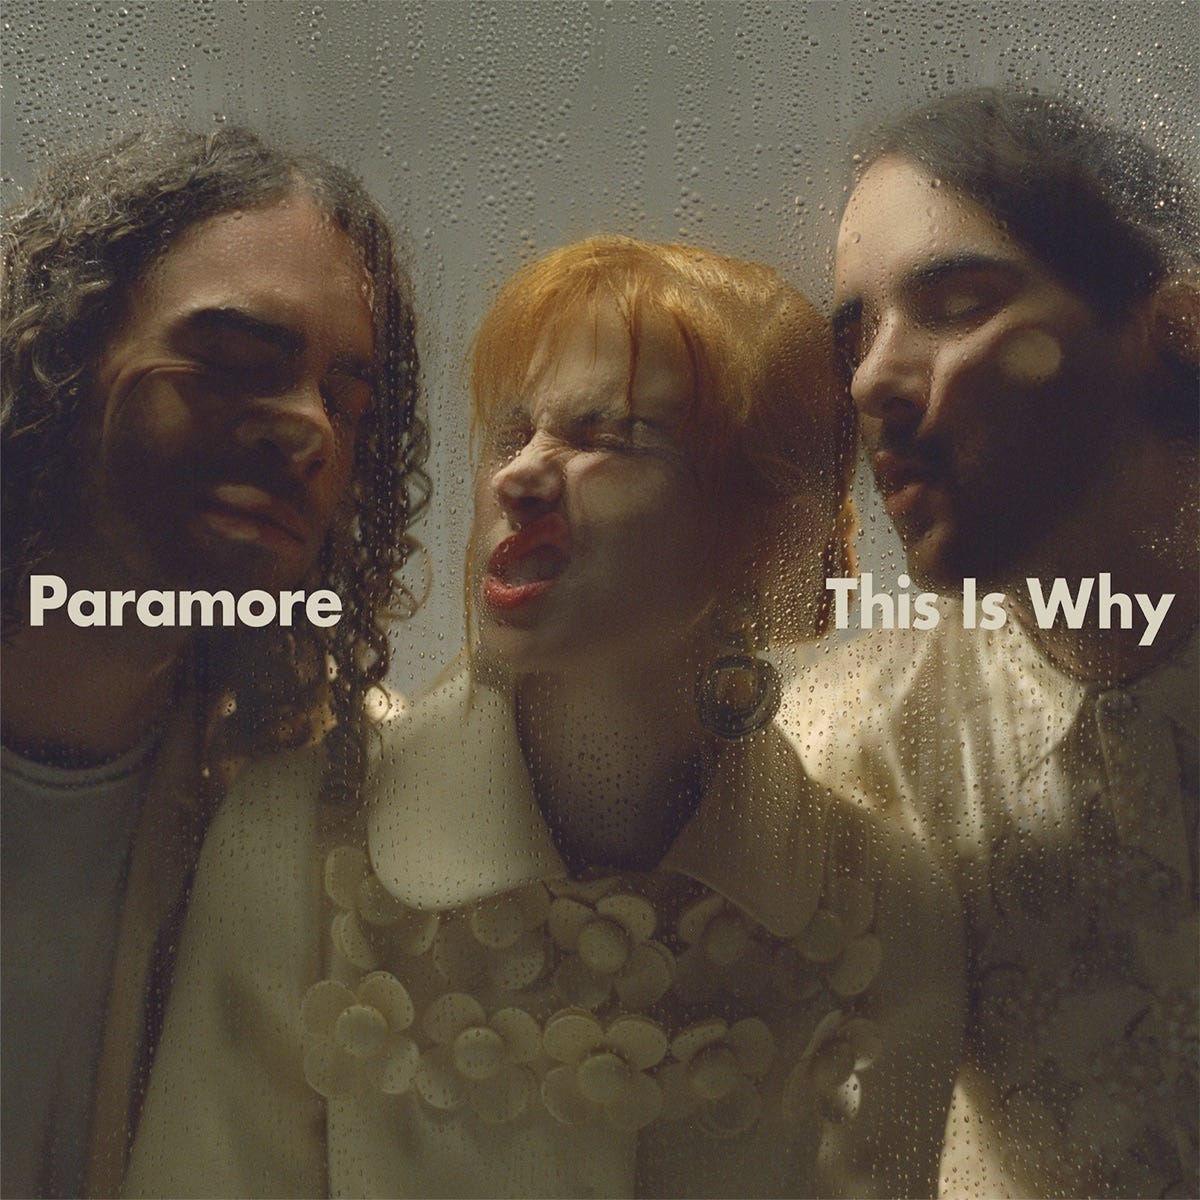 This Is Why - Album by Paramore - Apple Music